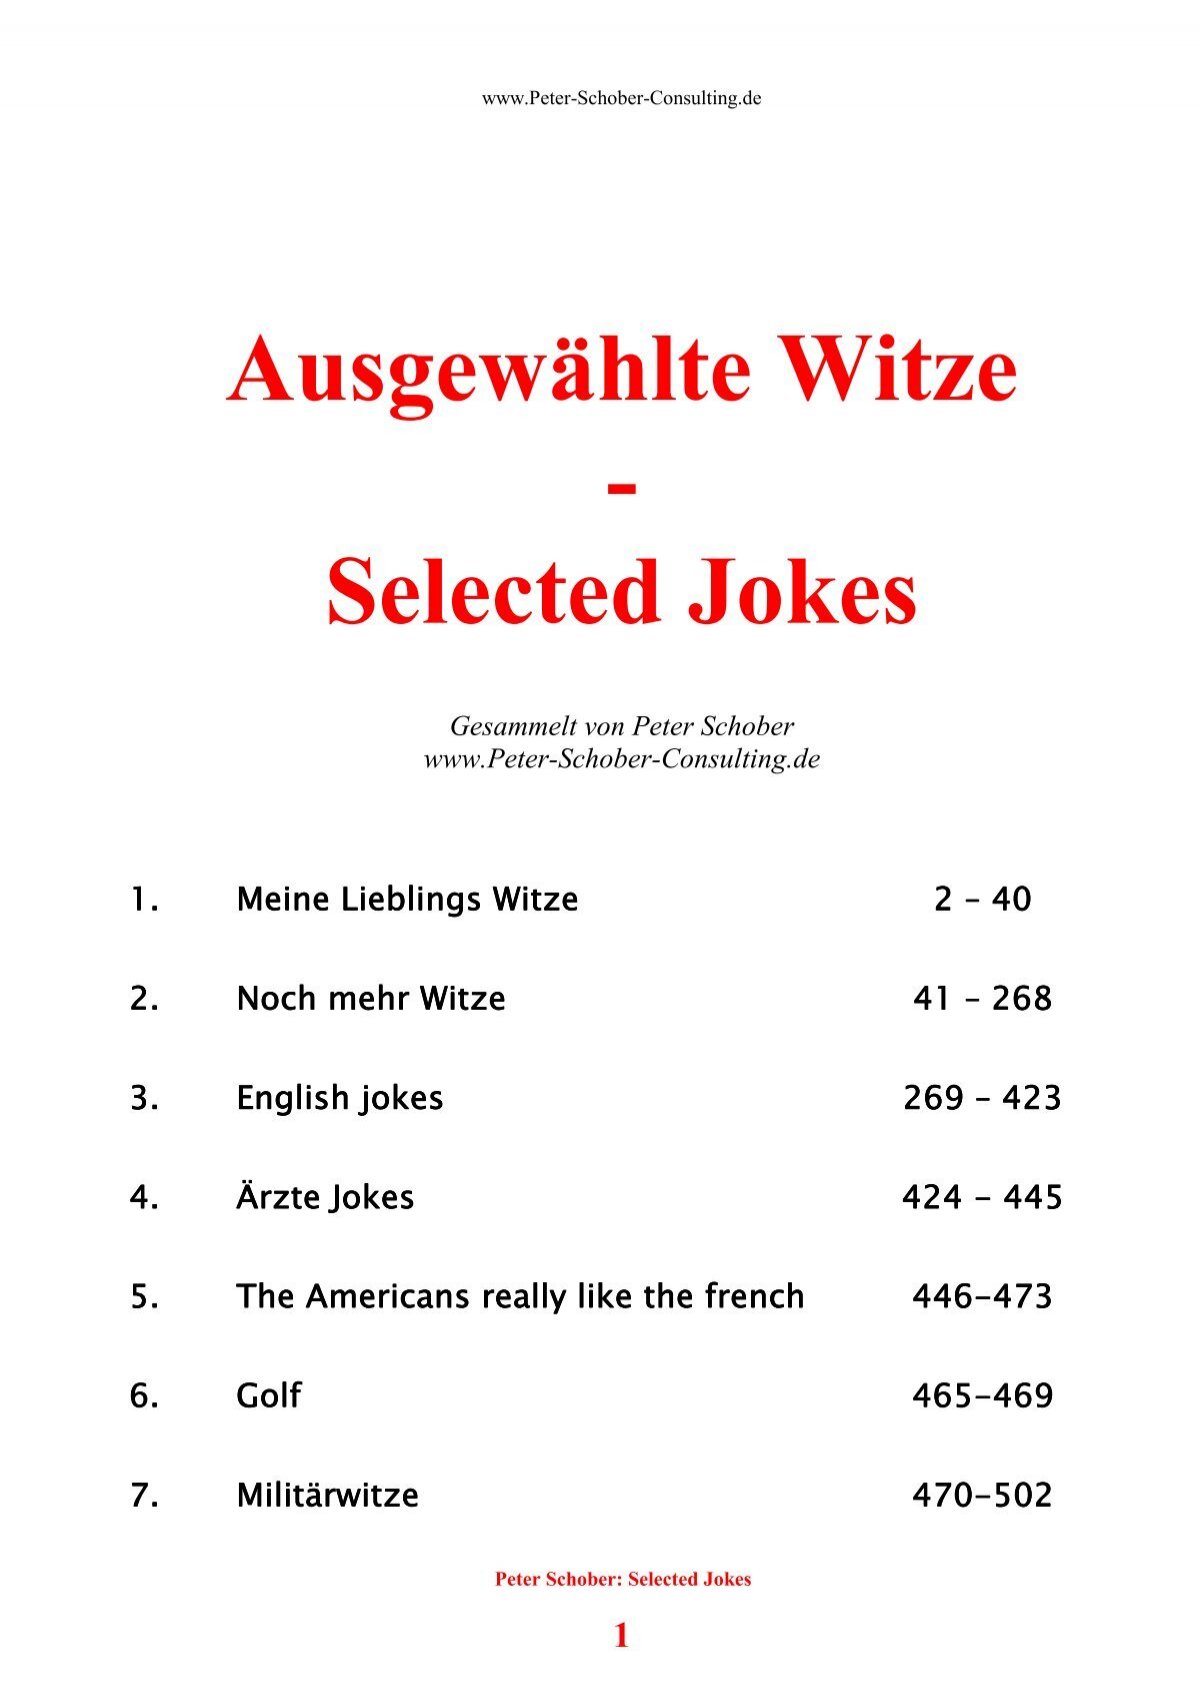 Ausgewählte Witze - Selected Jokes Consulting.html - - home